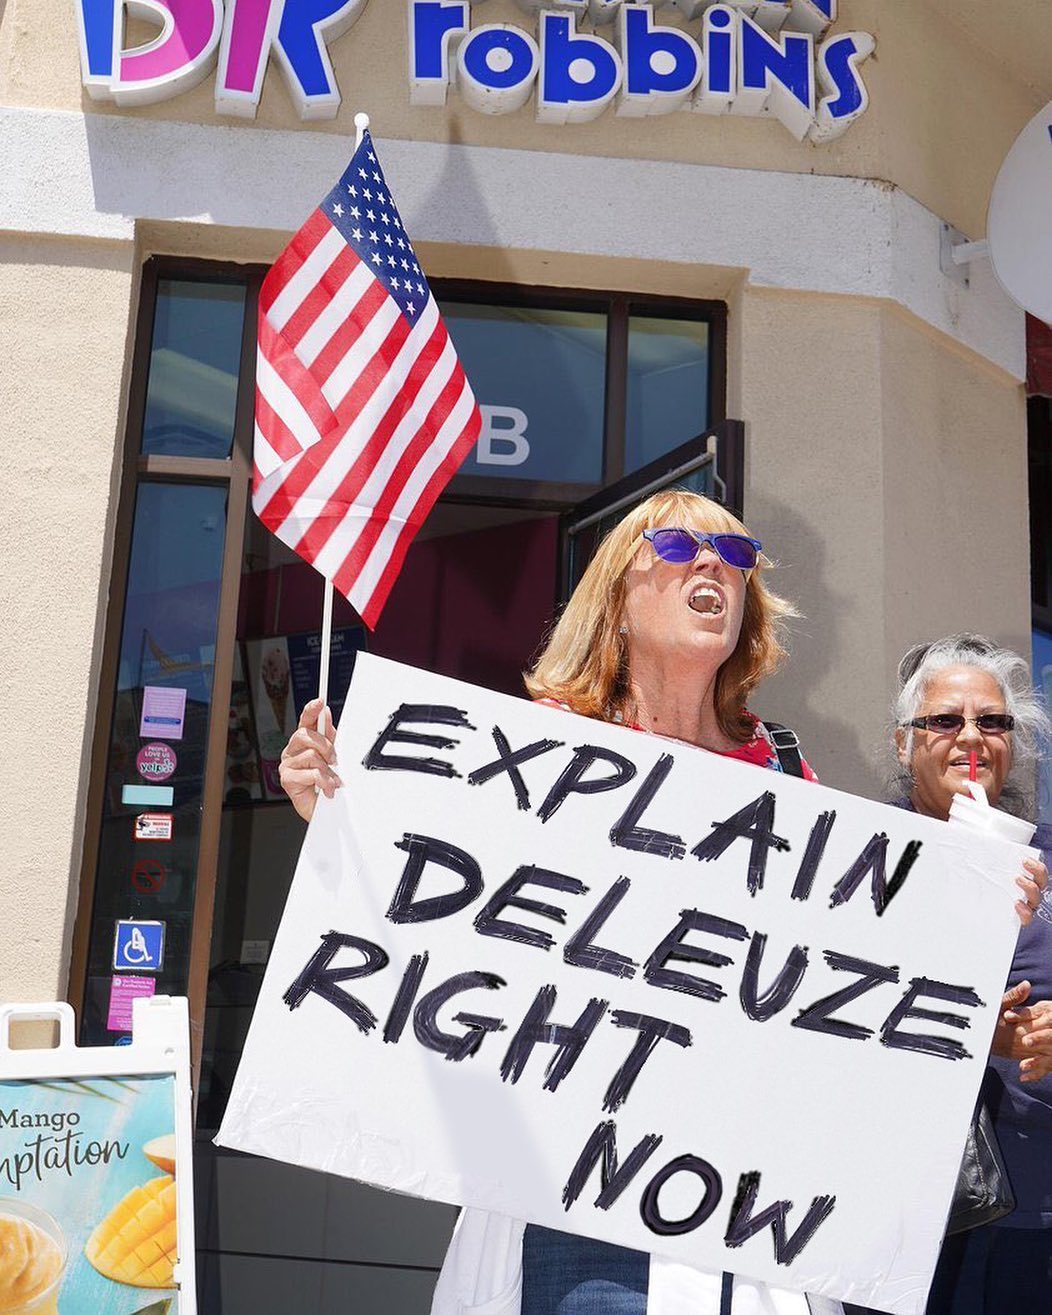 Person holding a sign: “Explain Deleuze right now“.